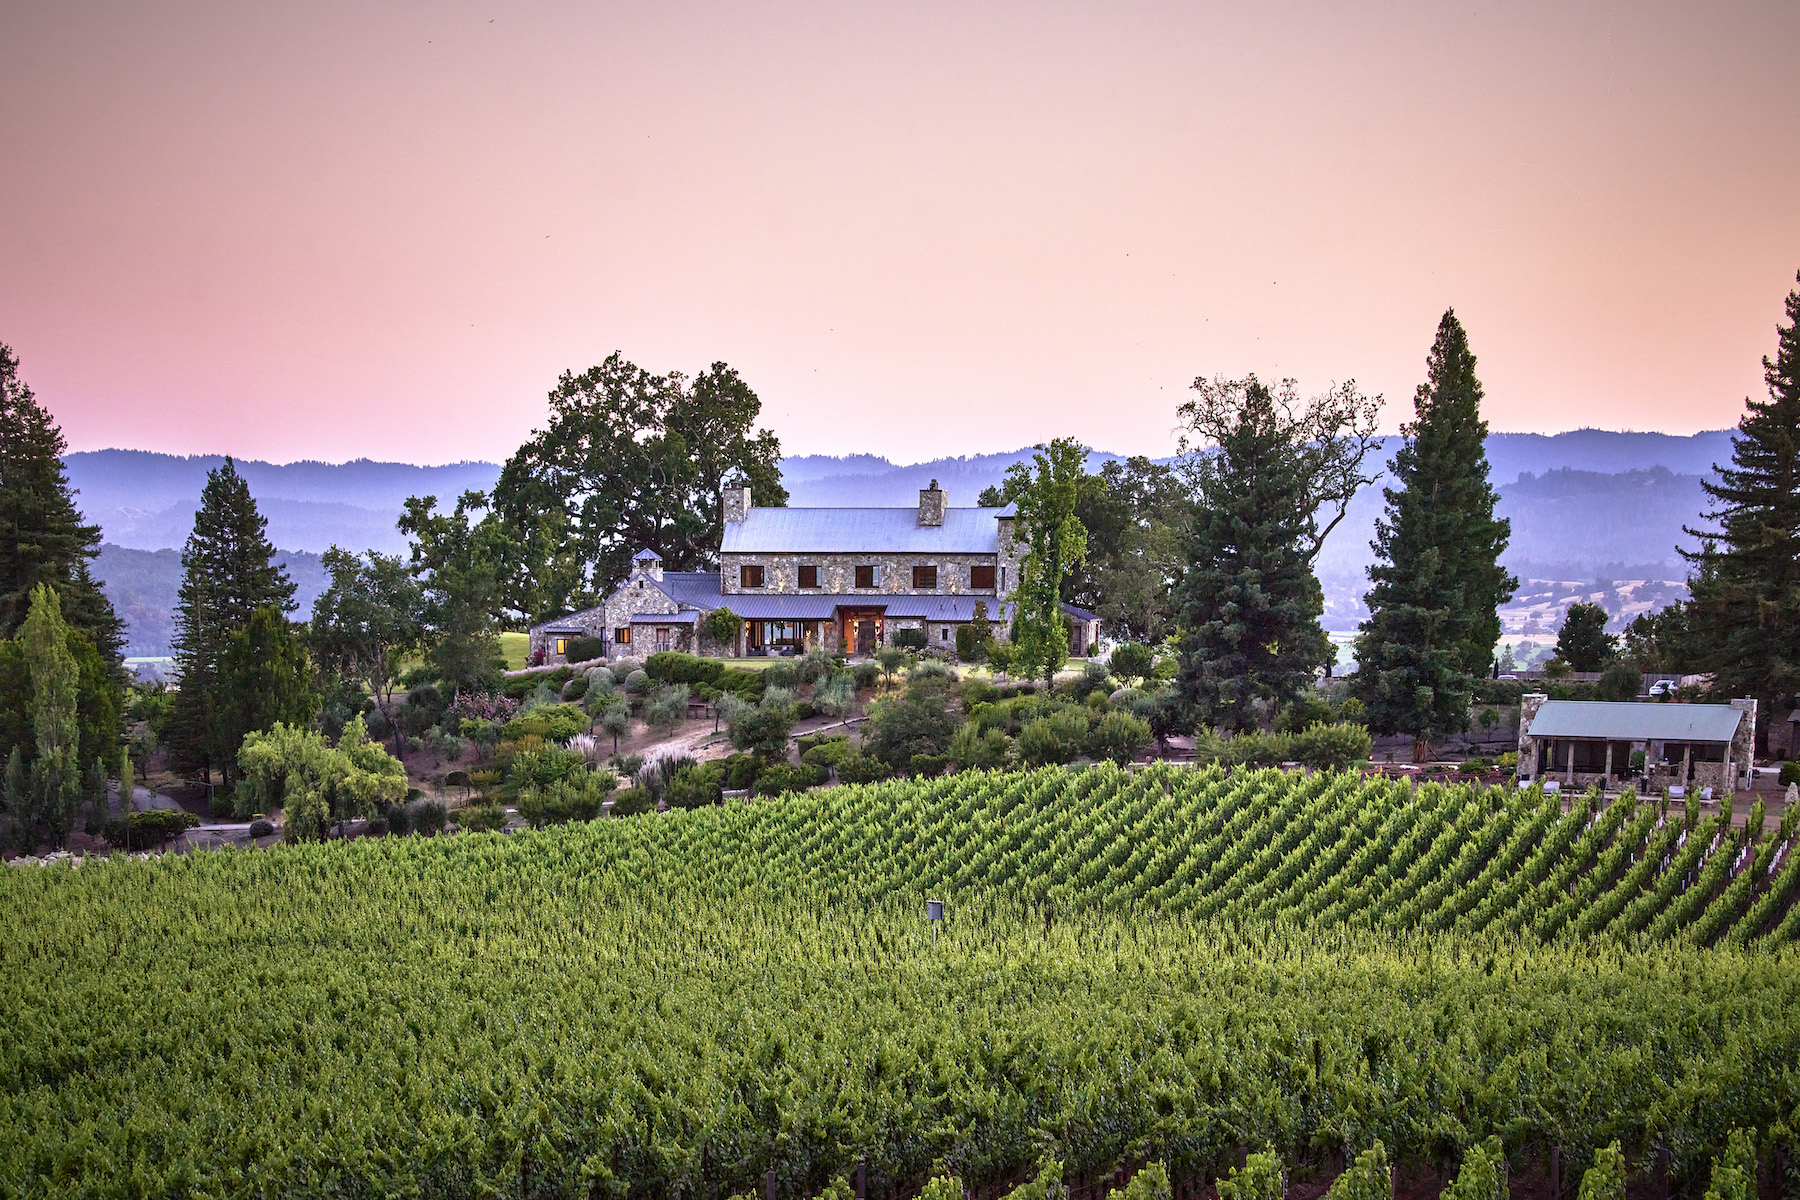 The residence stands behind green grape vines at dusk